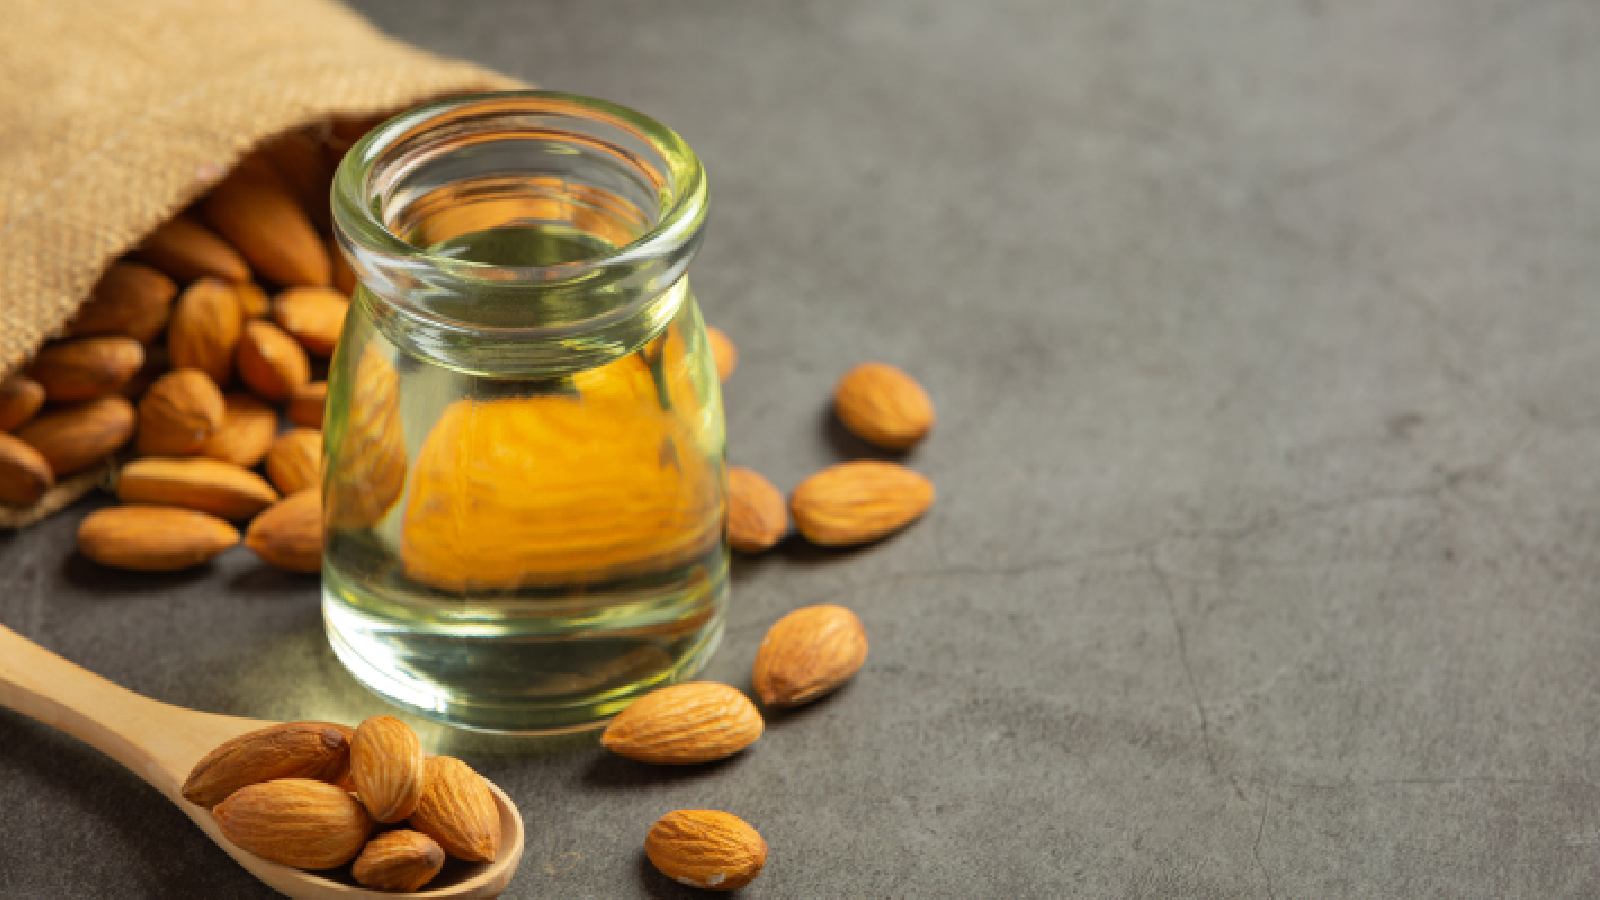 Almond oil: Benefits and how to use it as make-up remover